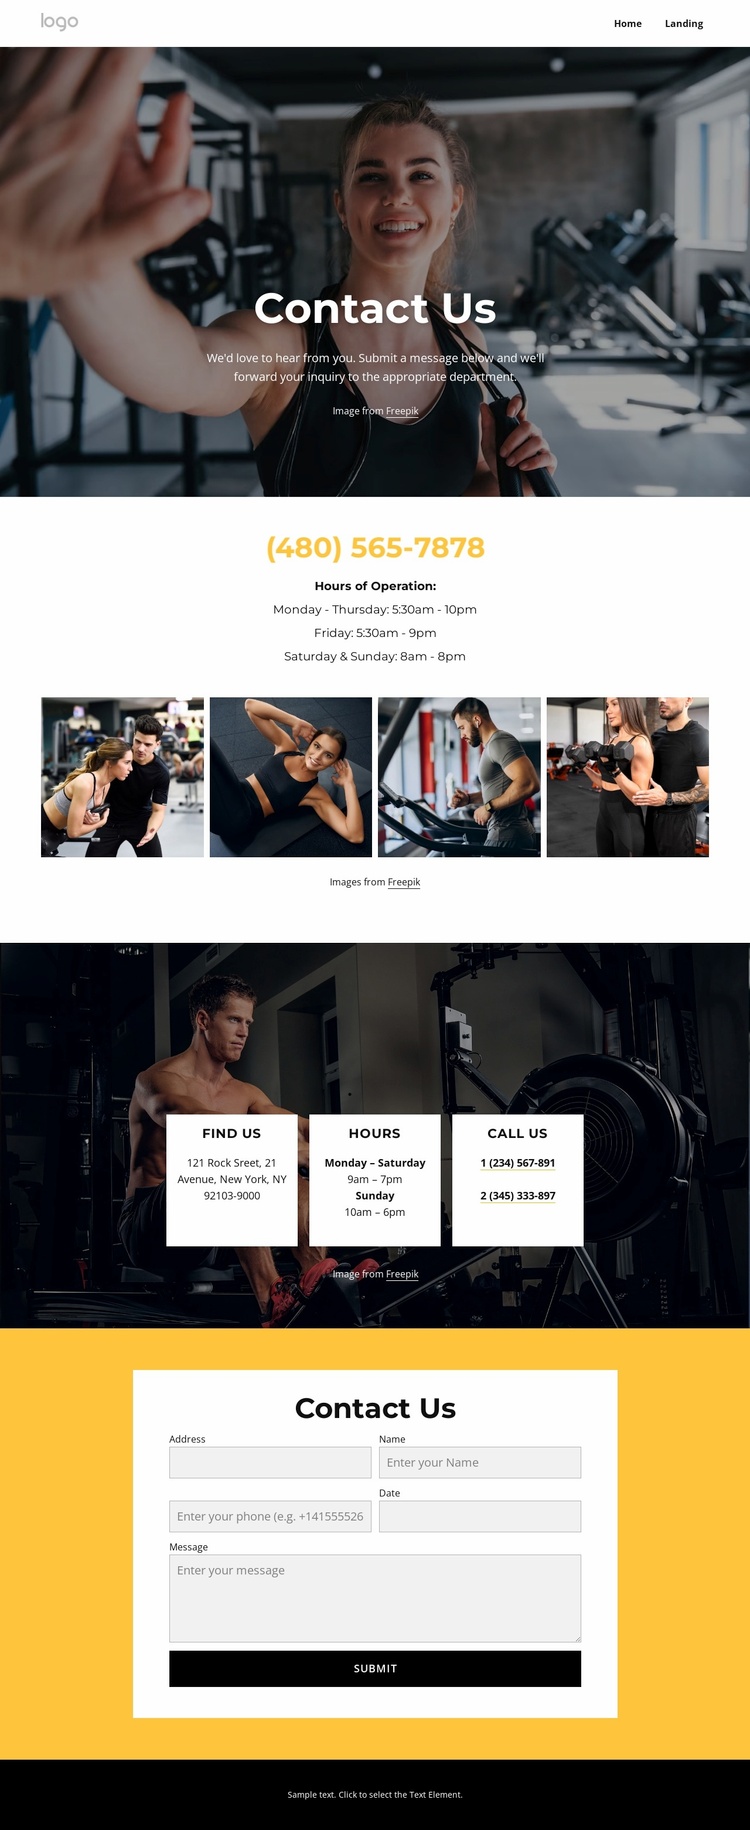 Personal training, group classes Website Template